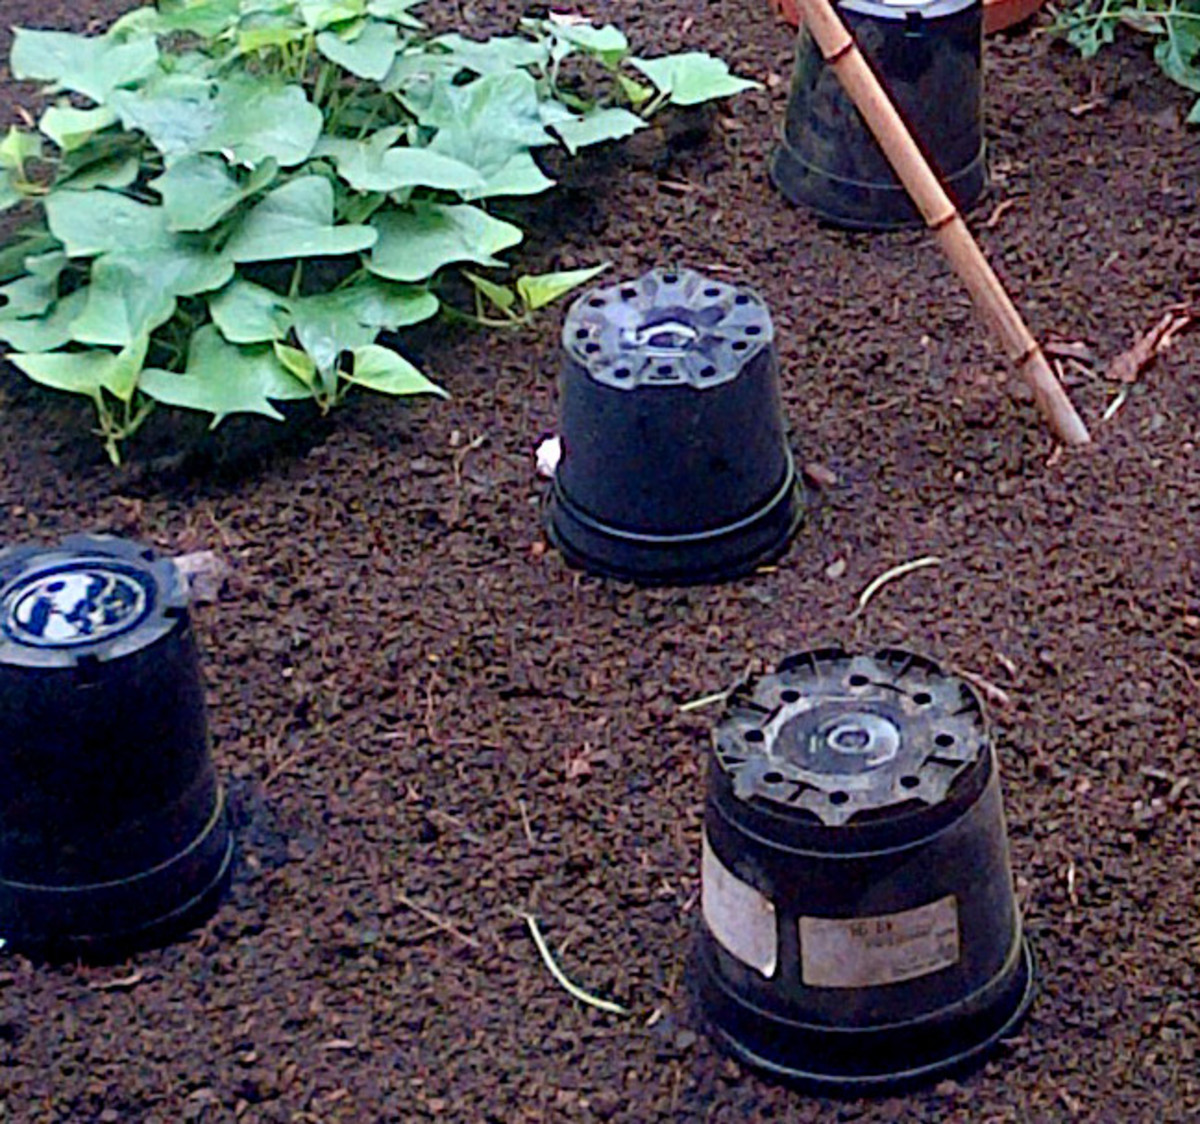 Upturned pots placed over plants at night help to protect against slugs, snails and bigger pests.